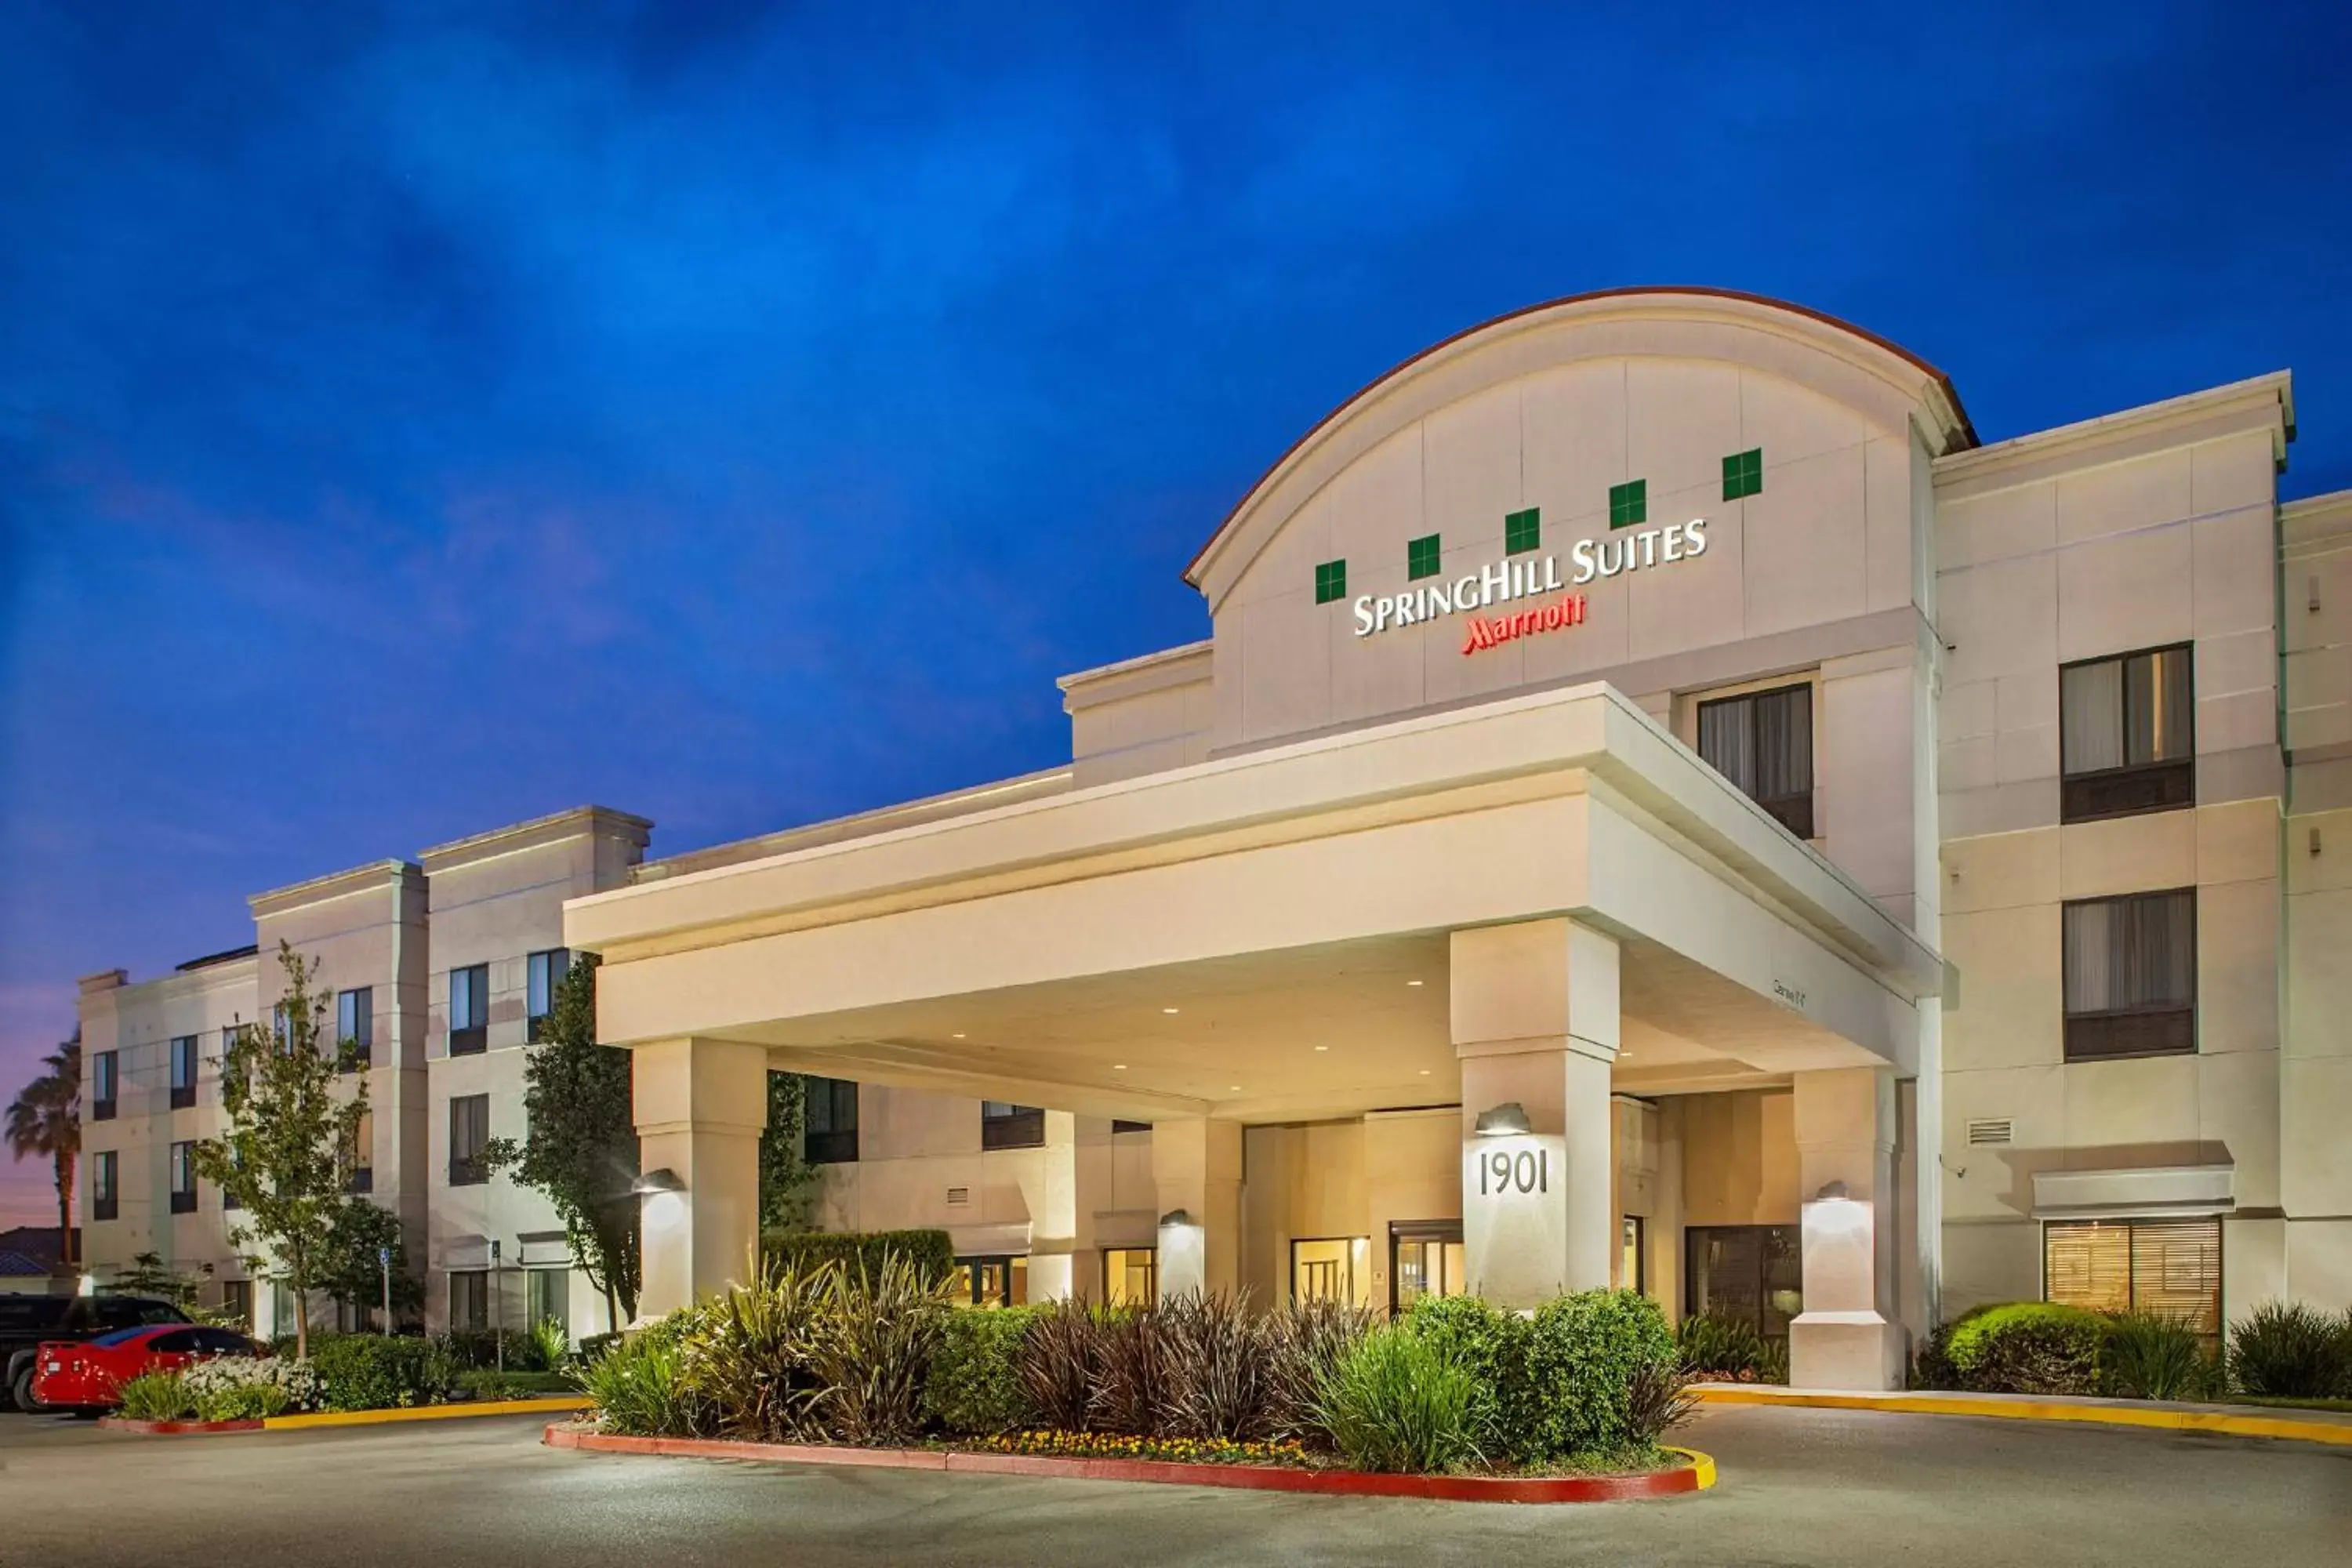 Property Building in SpringHill Suites by Marriott Modesto